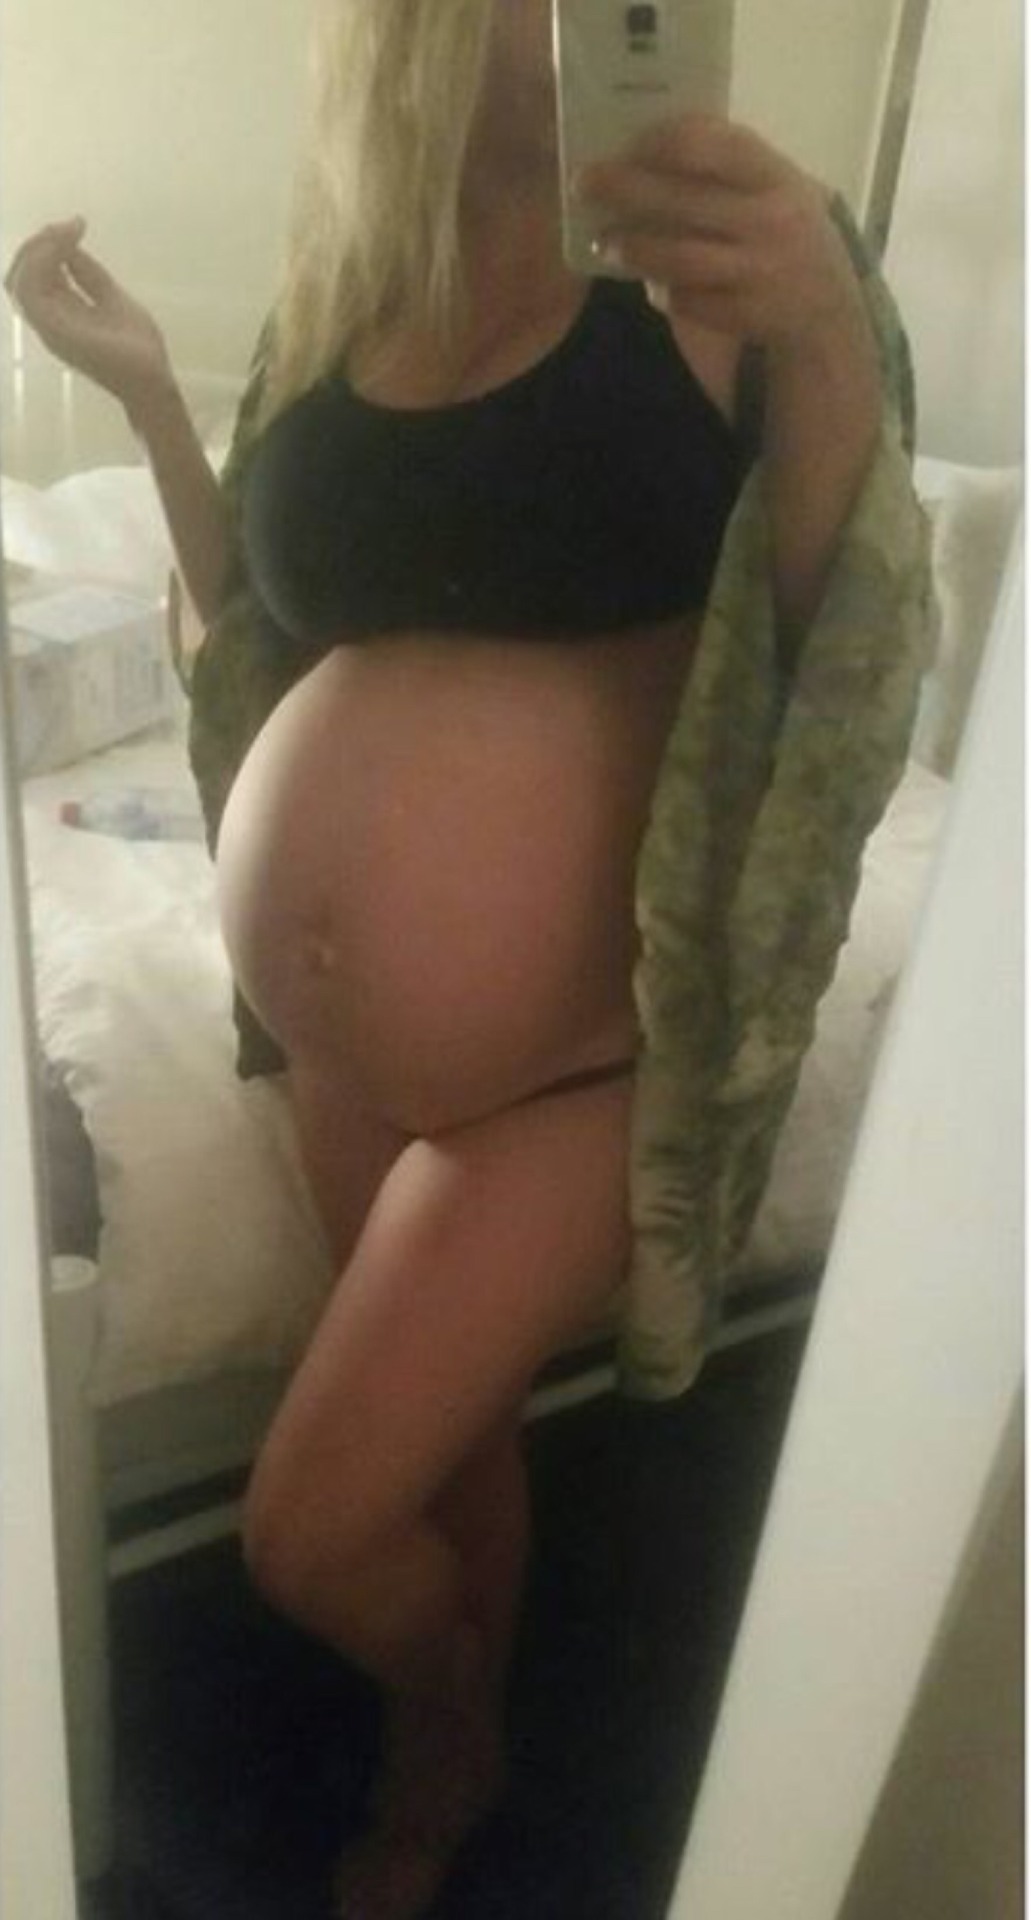 thefertilevalley:  Lesley was in an advanced state of pregnancy, thoroughly knocked